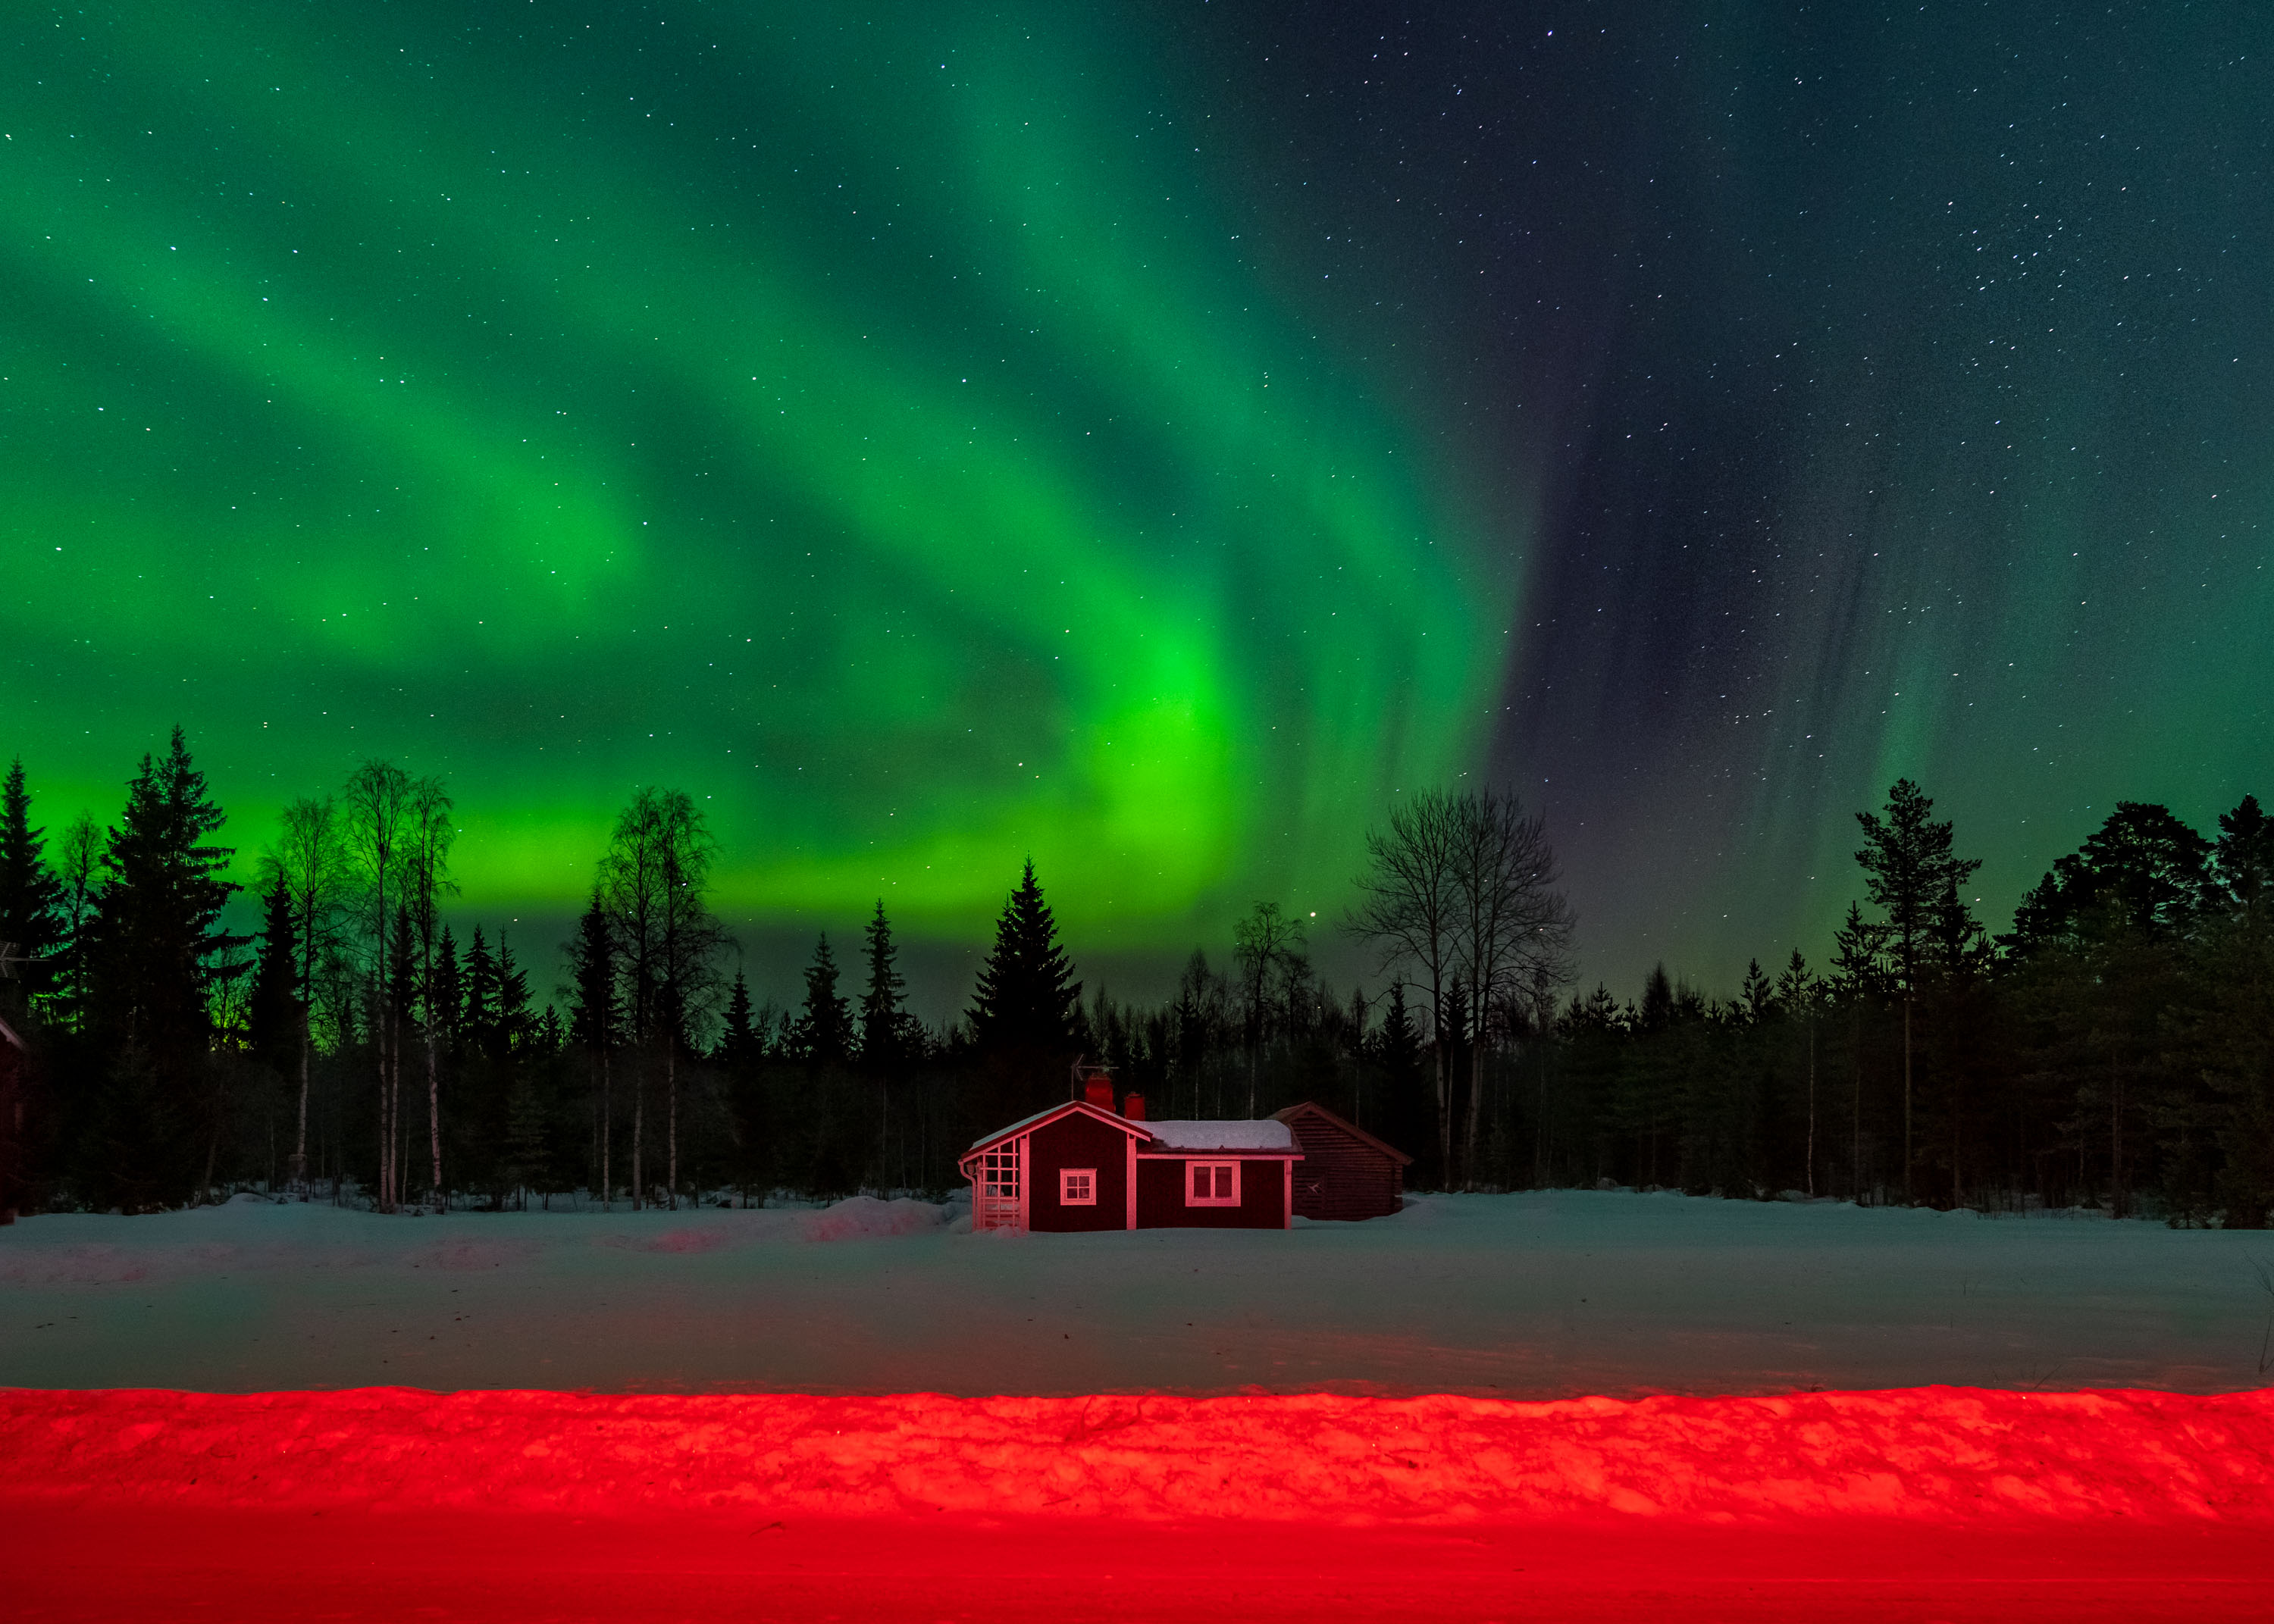 MPB guide: How to shoot the Northern Lights